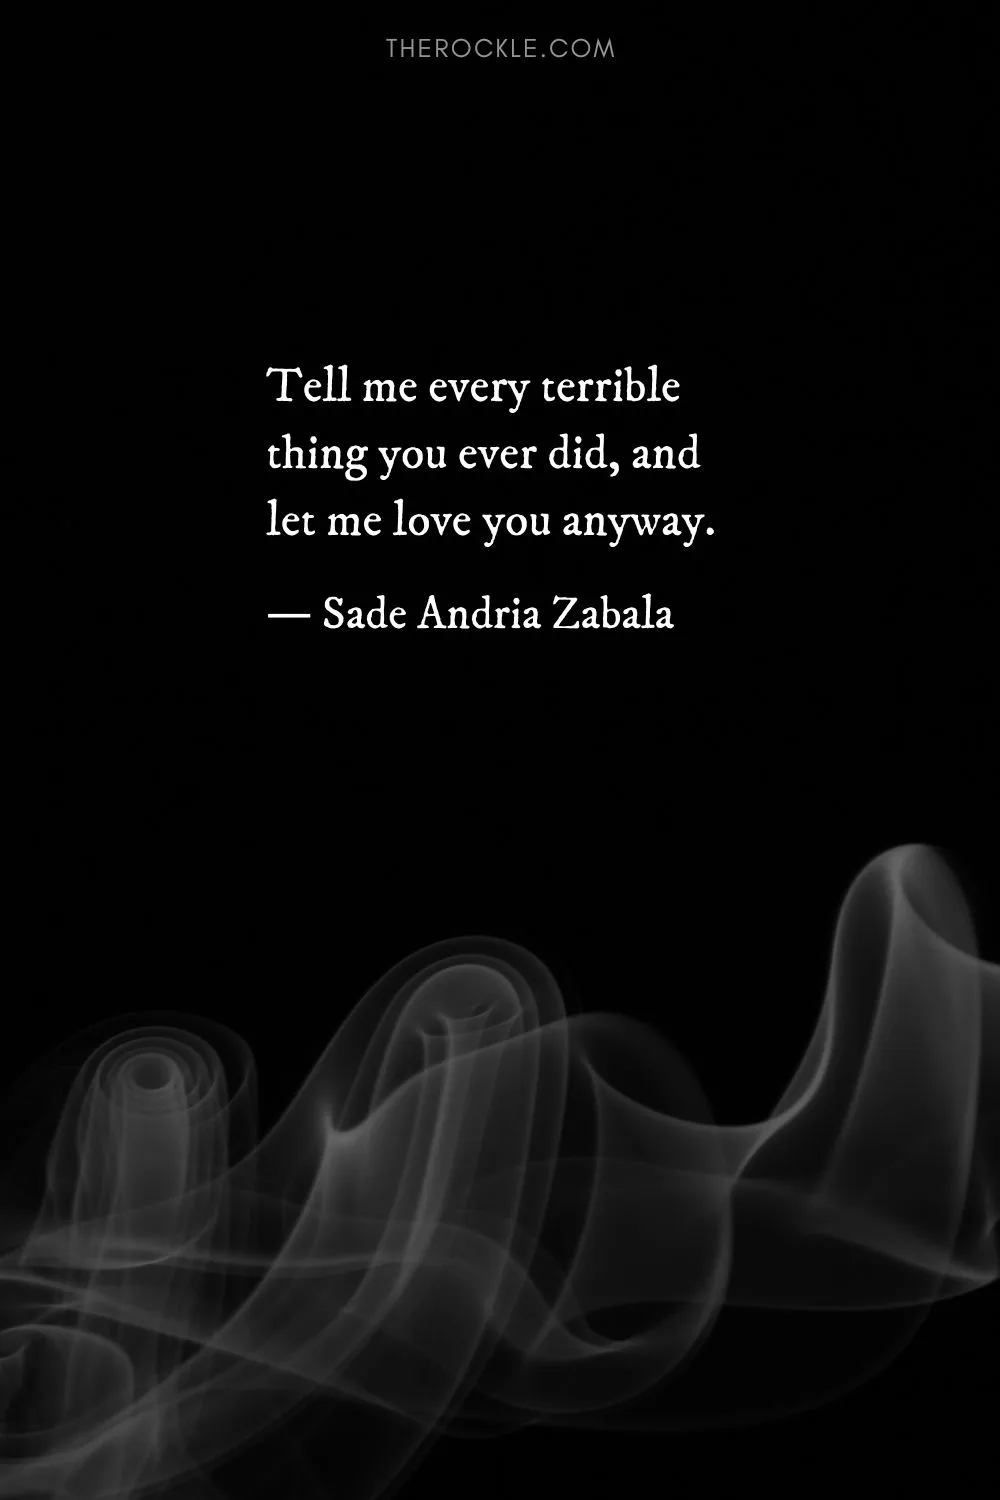 Sade Andria Zabala: “Tell me every terrible thing you ever did, and let me love you anyway.”